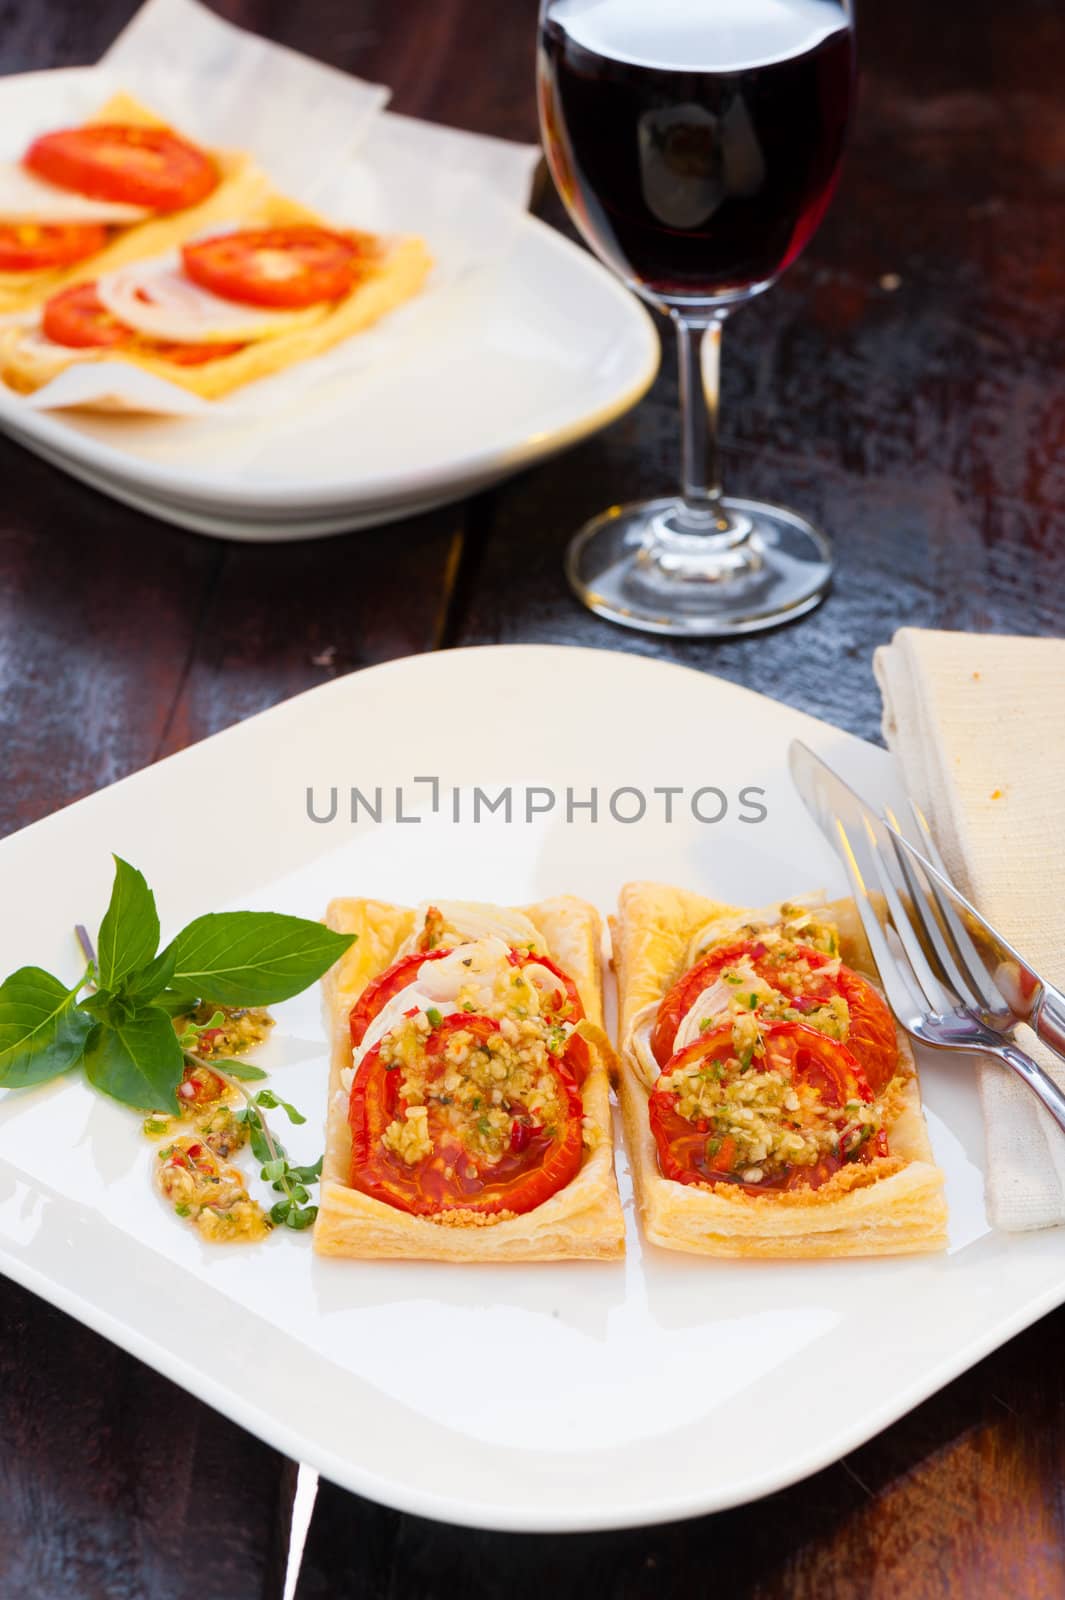 Two small piece of mini pizza with some herbs on white plate and a glass of red wine in the background